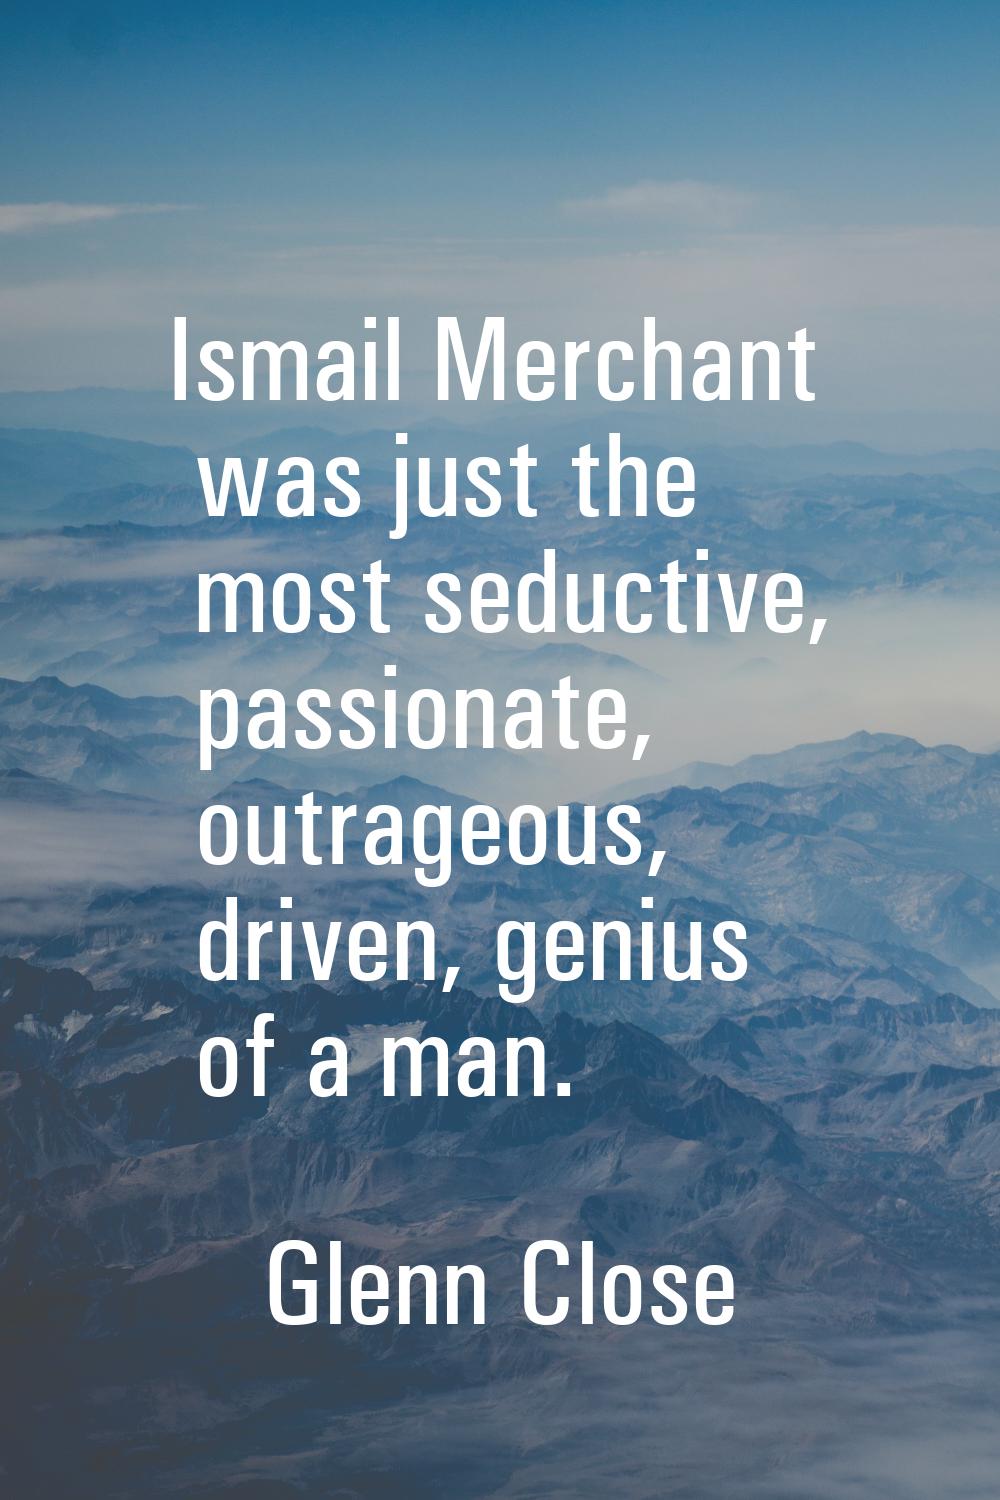 Ismail Merchant was just the most seductive, passionate, outrageous, driven, genius of a man.